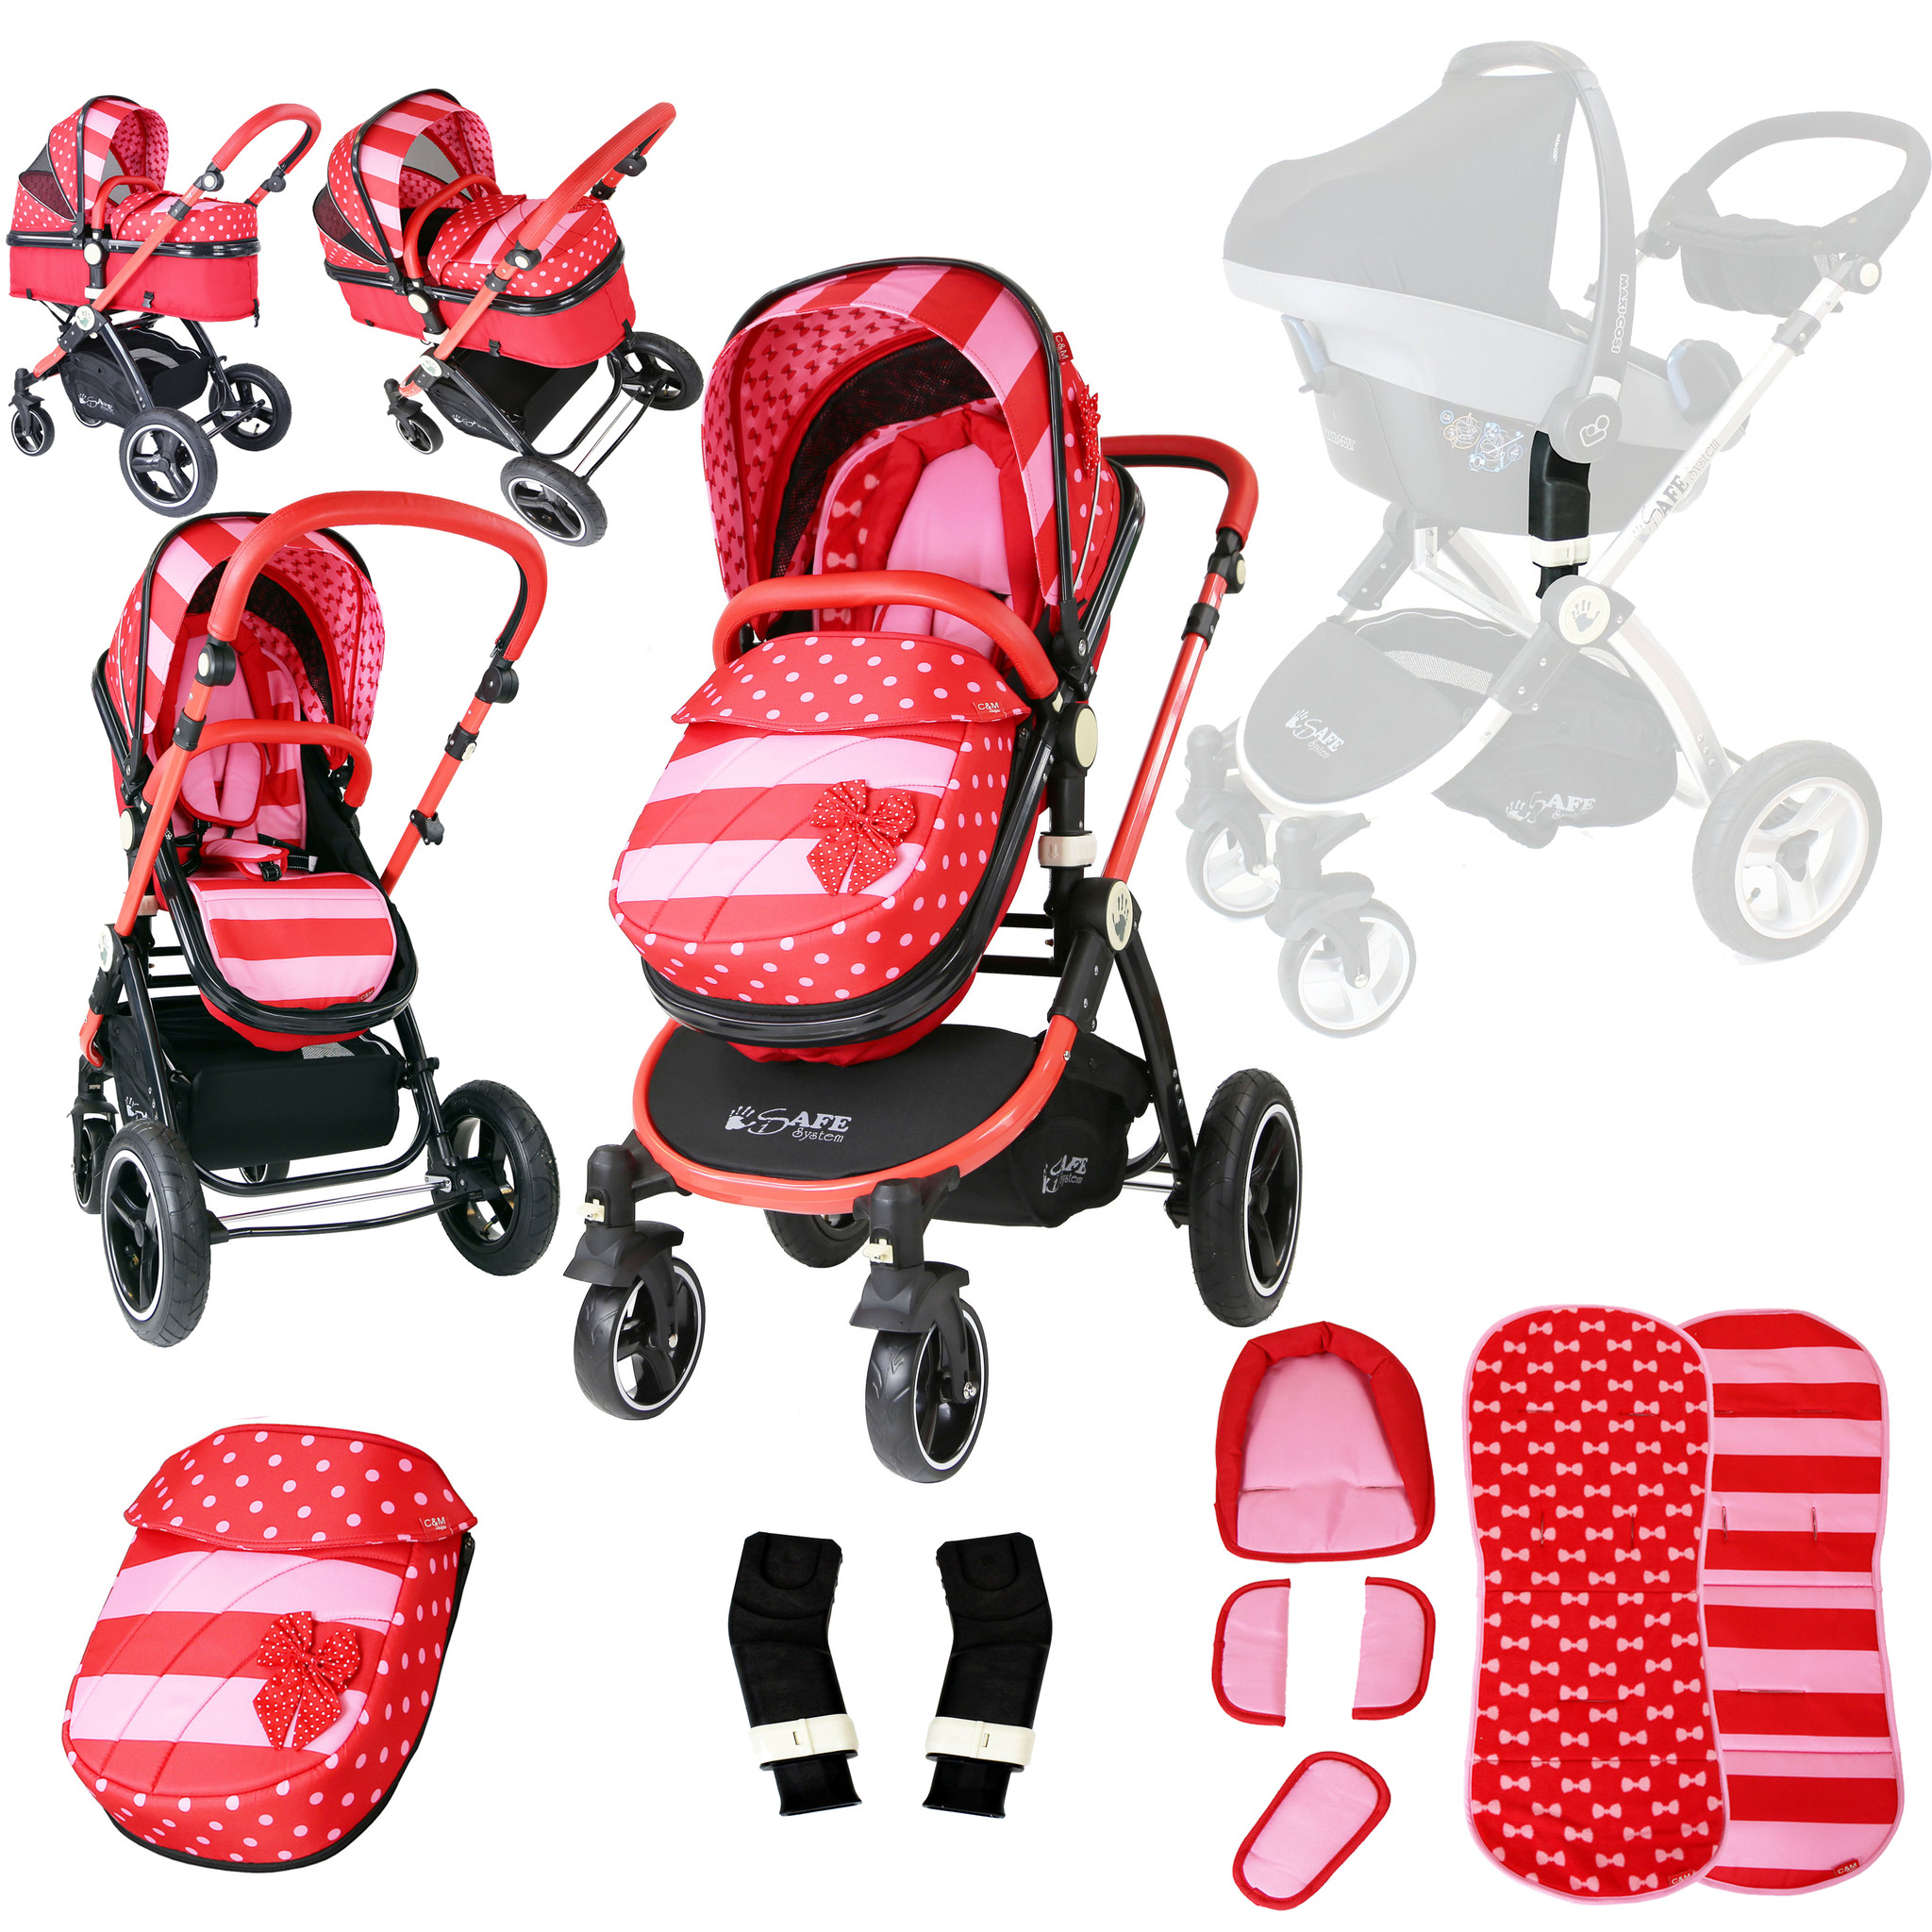 Welcome To Baby Travel LTD Exclusive British Designer And.